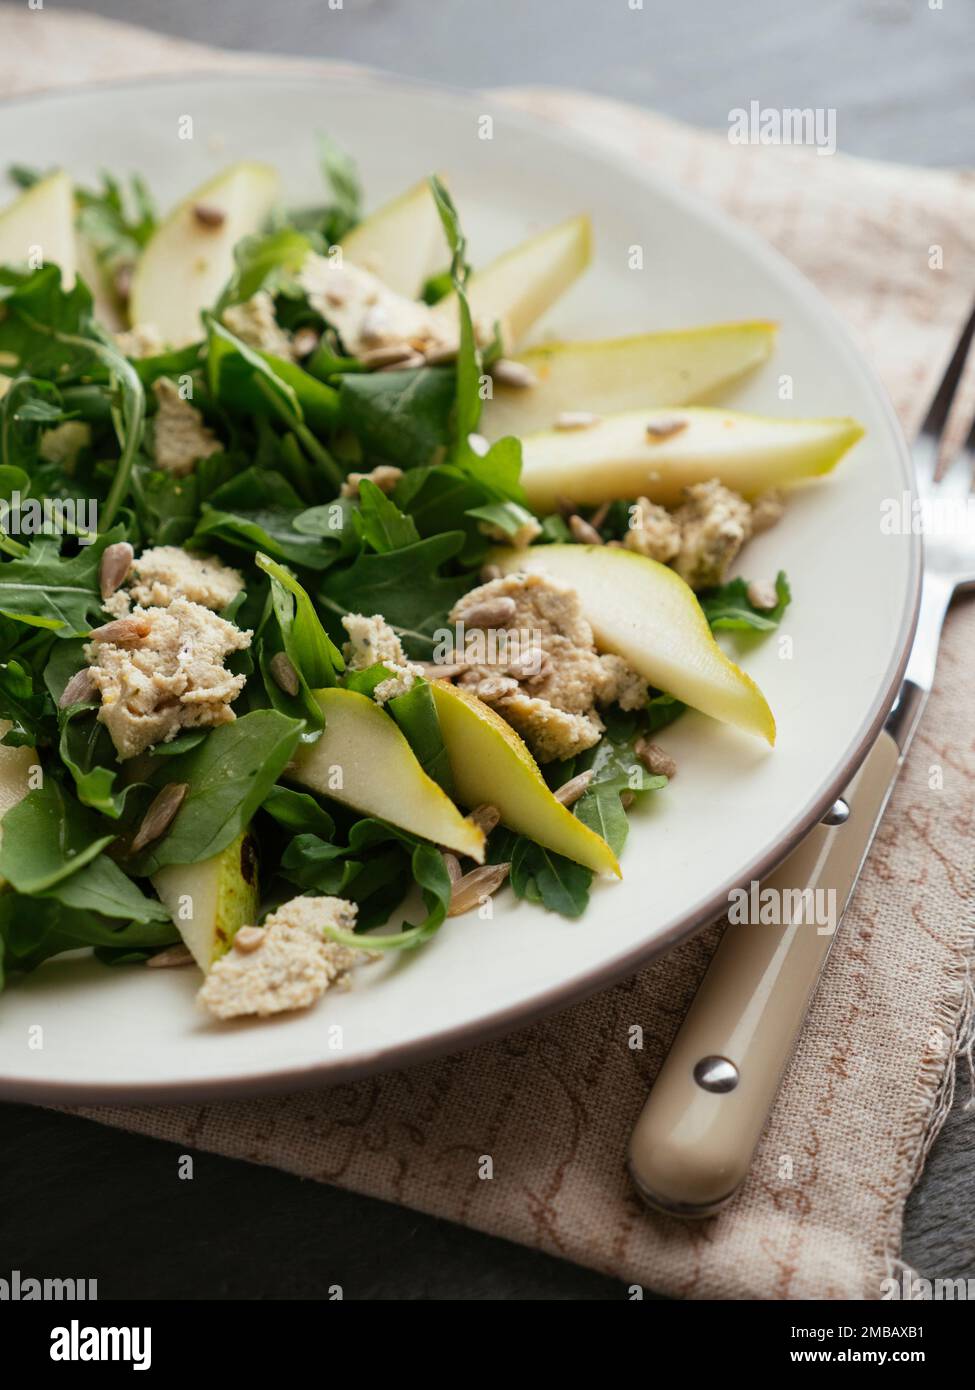 Plate with a pear and arugula salad with home made vegan feta cheese. Stock Photo